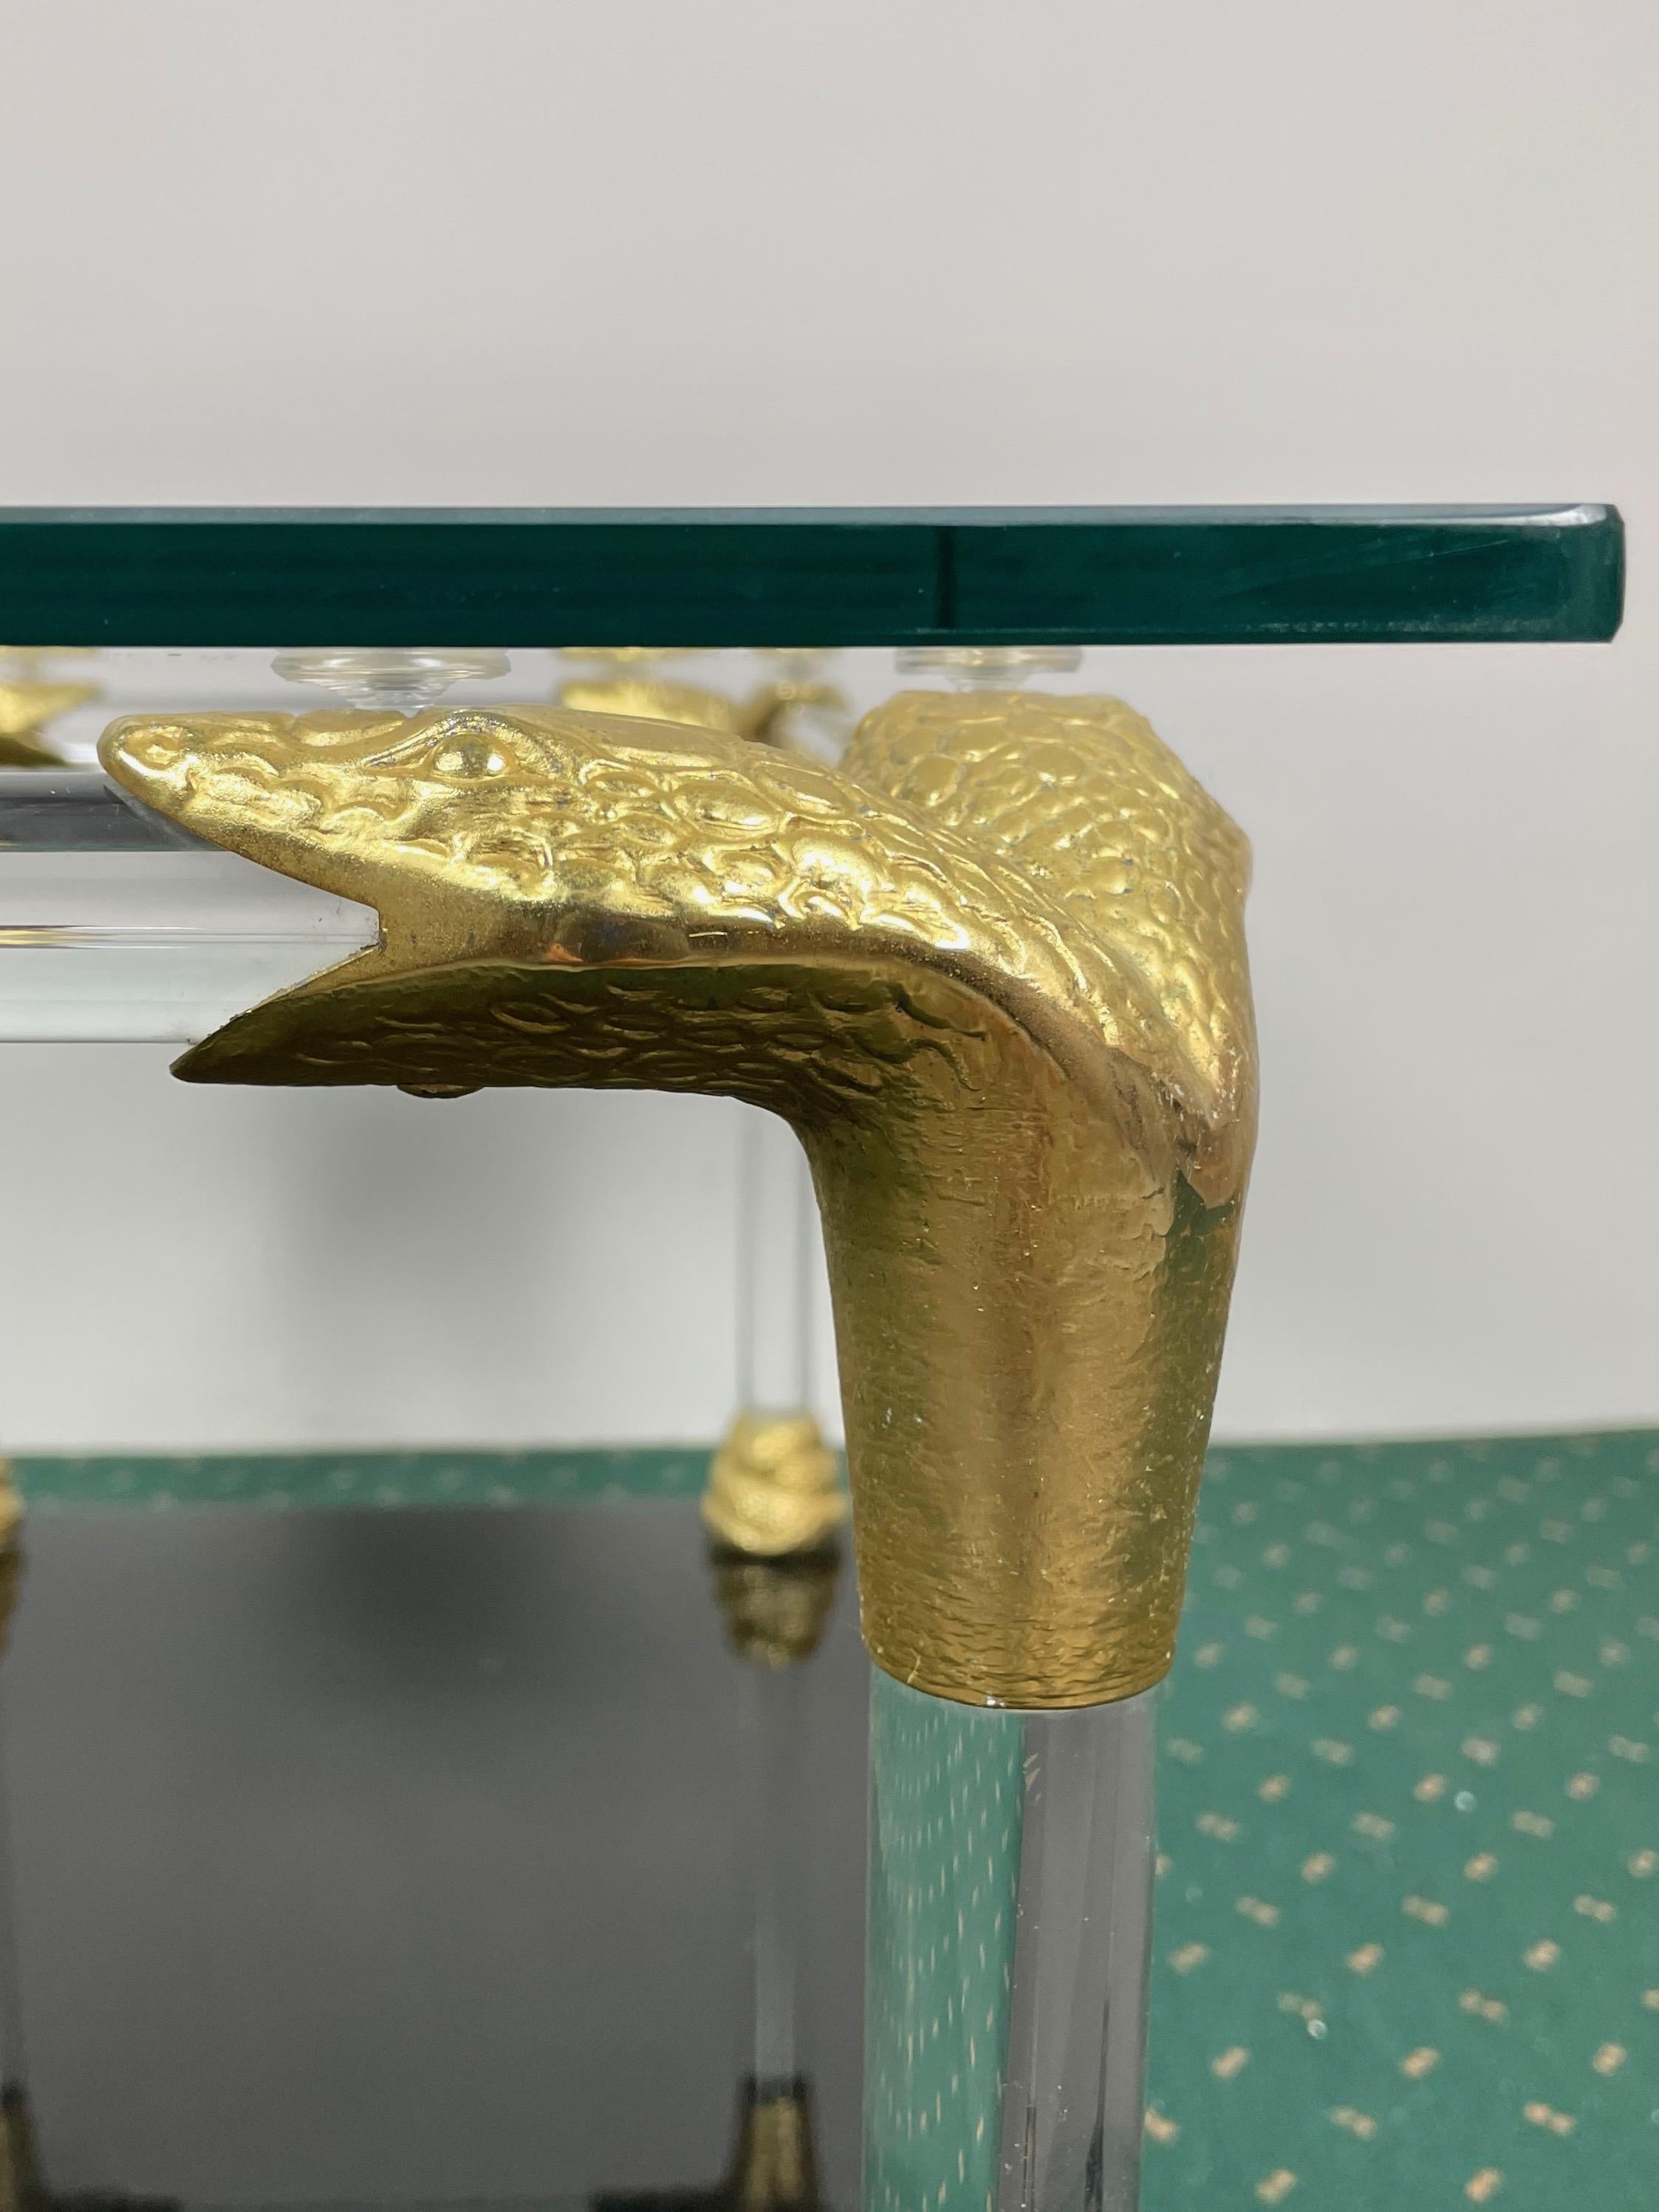 Lucite, Wood and Brass Coffee Table with Snake Head Details, Italy, 1970s For Sale 1